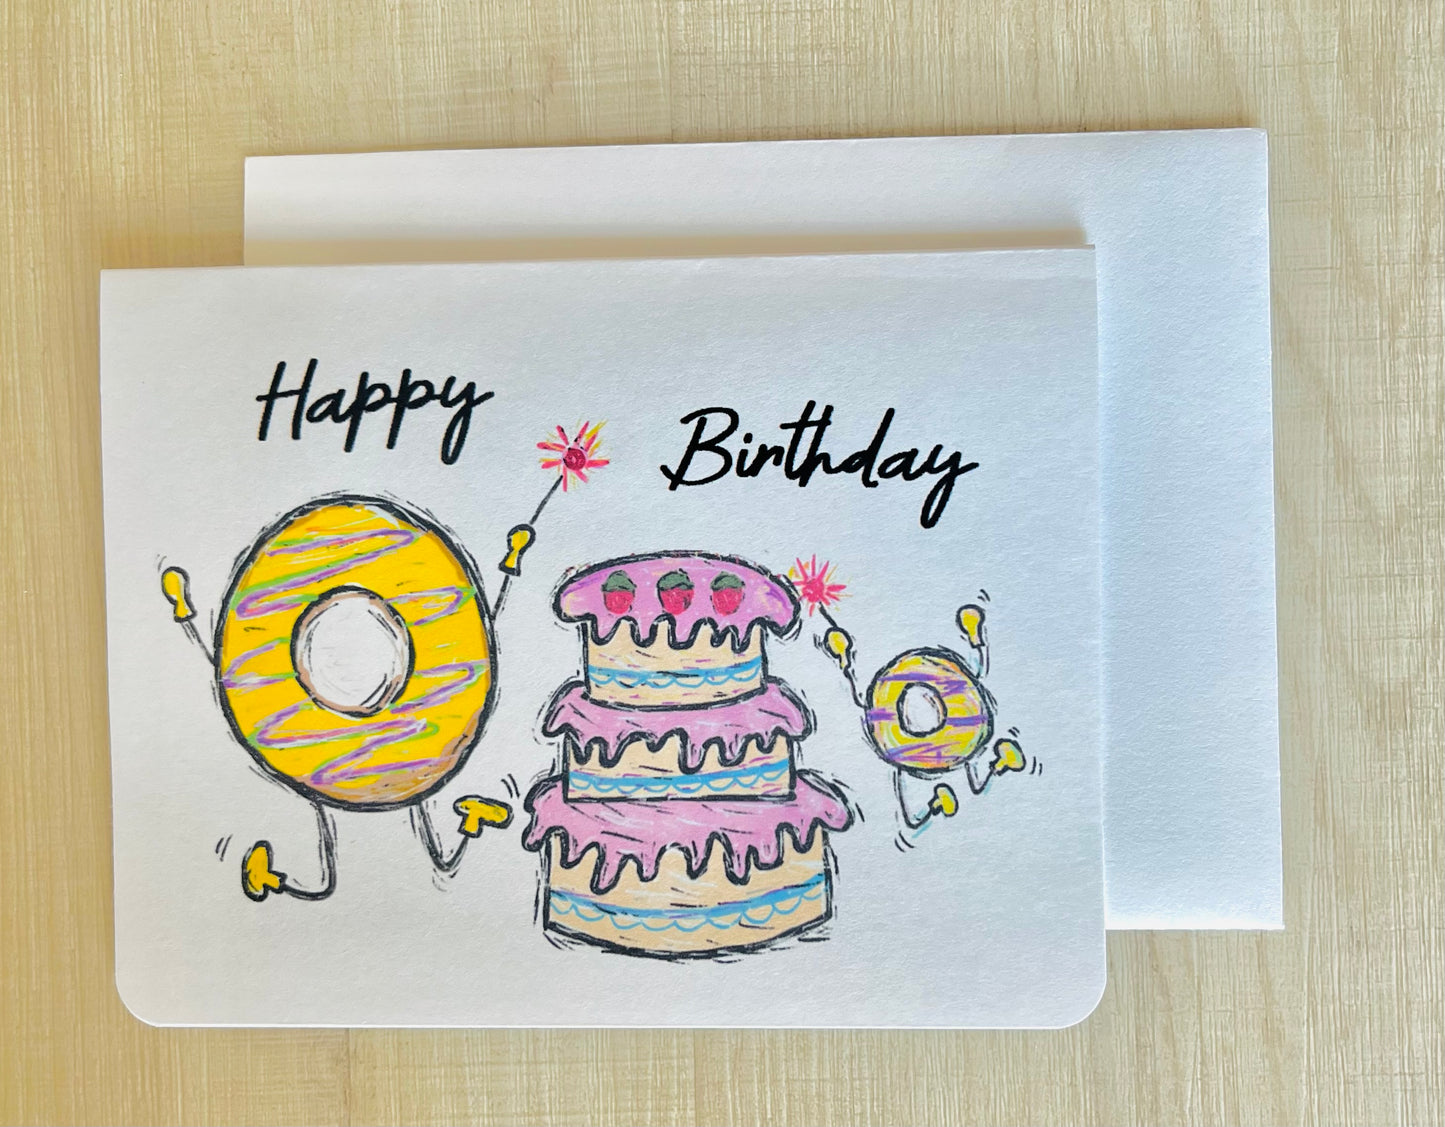 Donuts with Cake and Sparklers Handmade Birthday Greeting Card